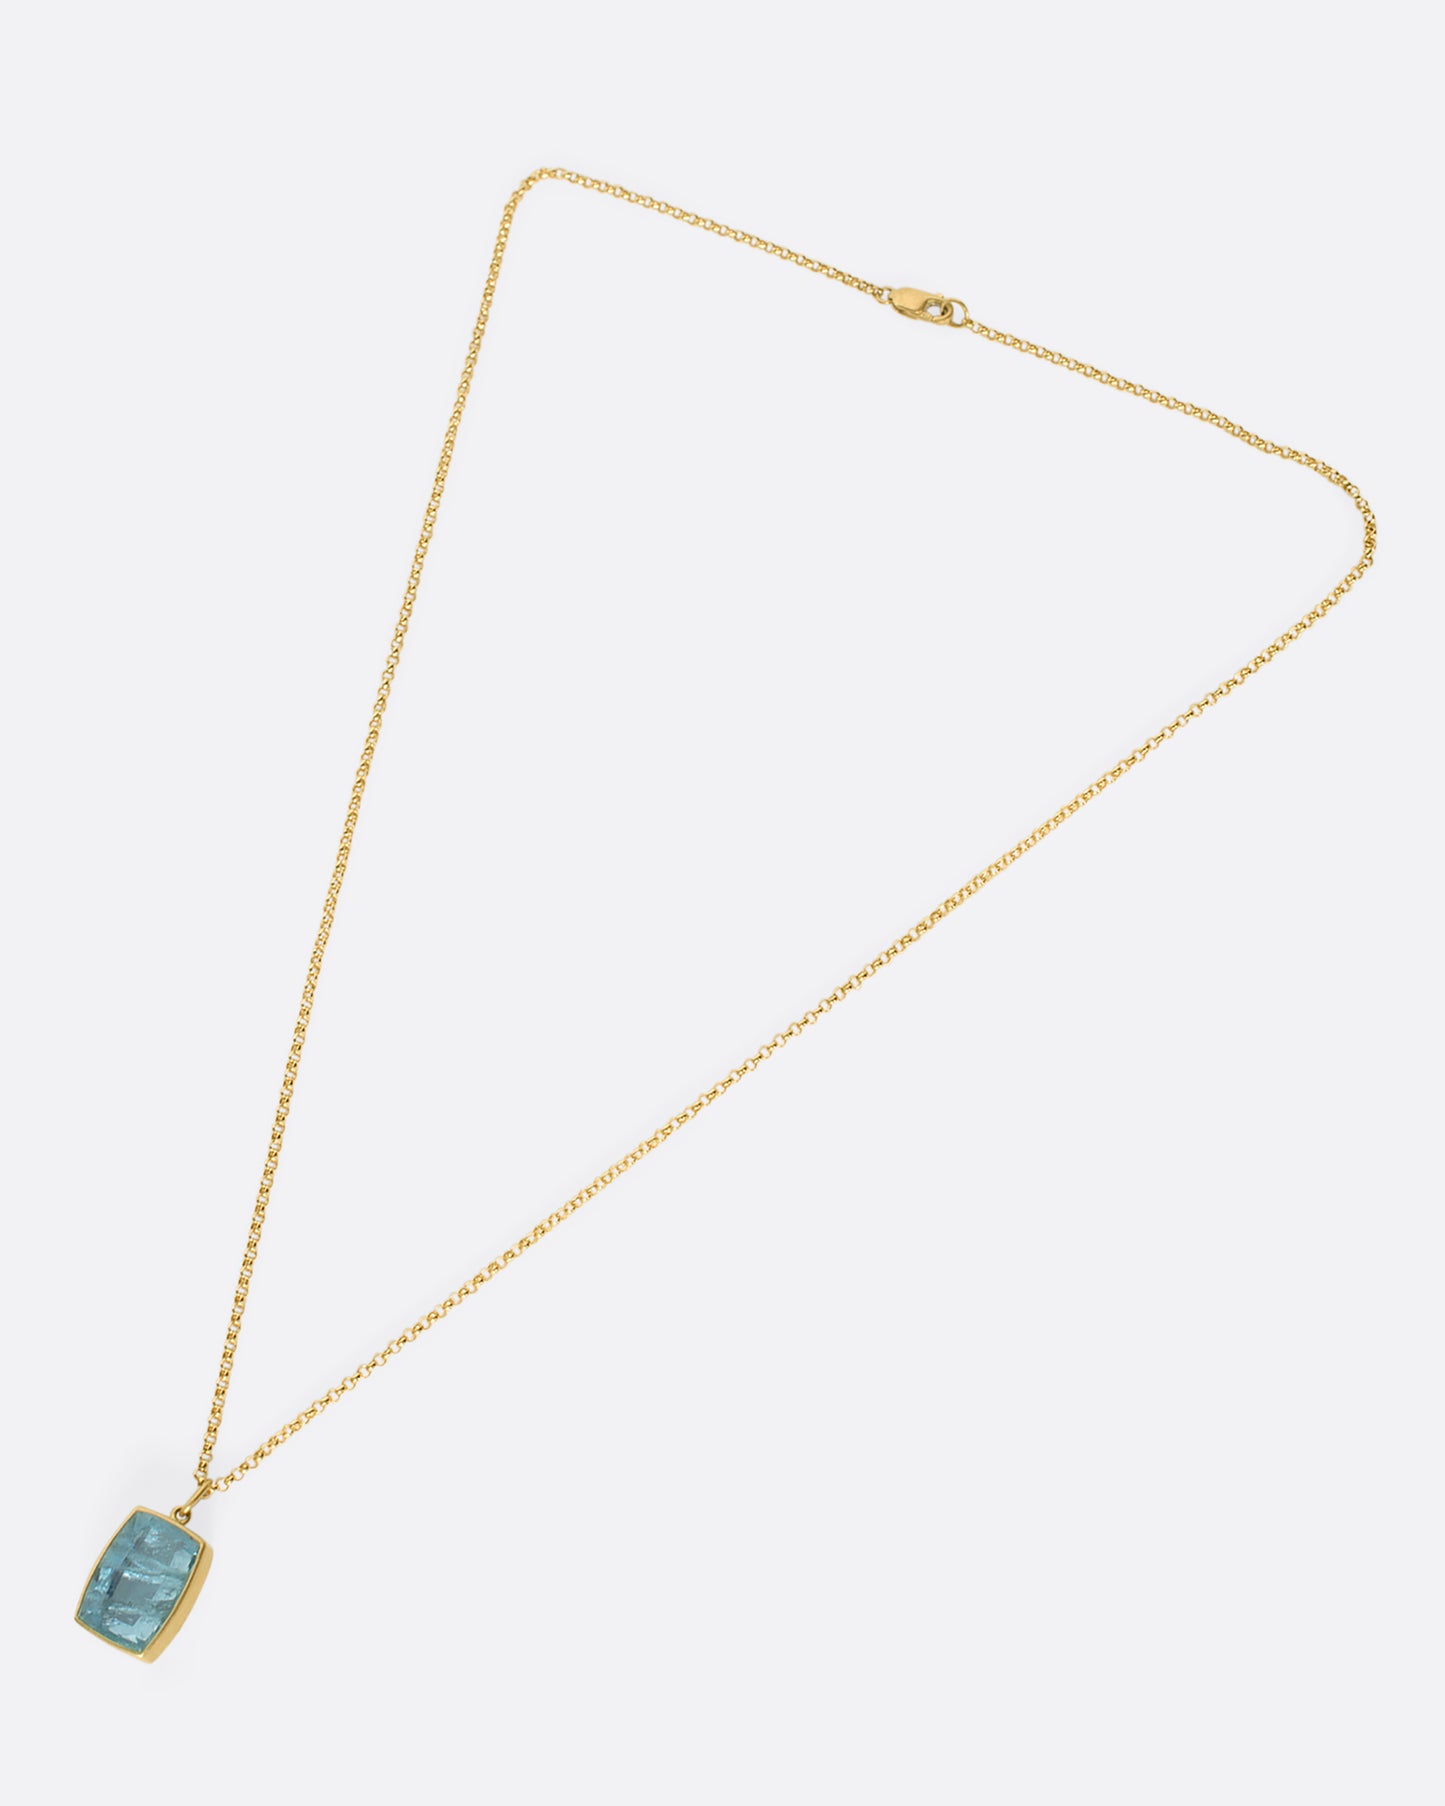 A cushion shaped aquamarine pendant with a yellow gold bezel on a gold chain laid down flat.